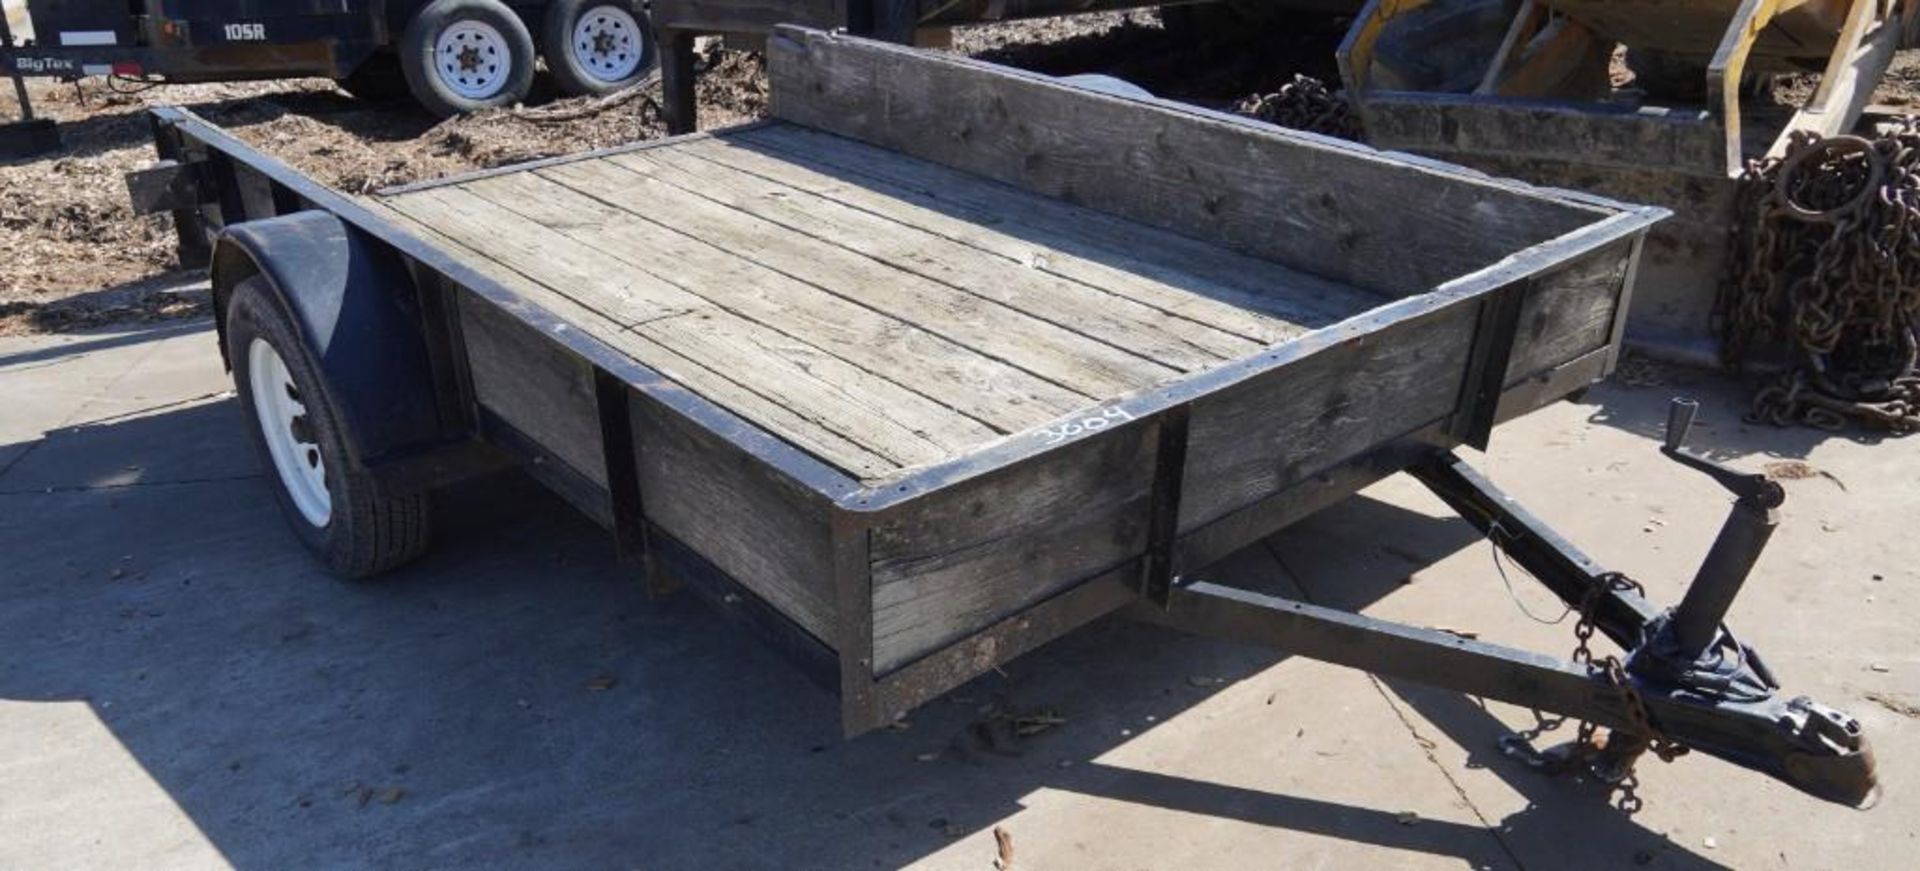 Utility Trailer - Image 2 of 16